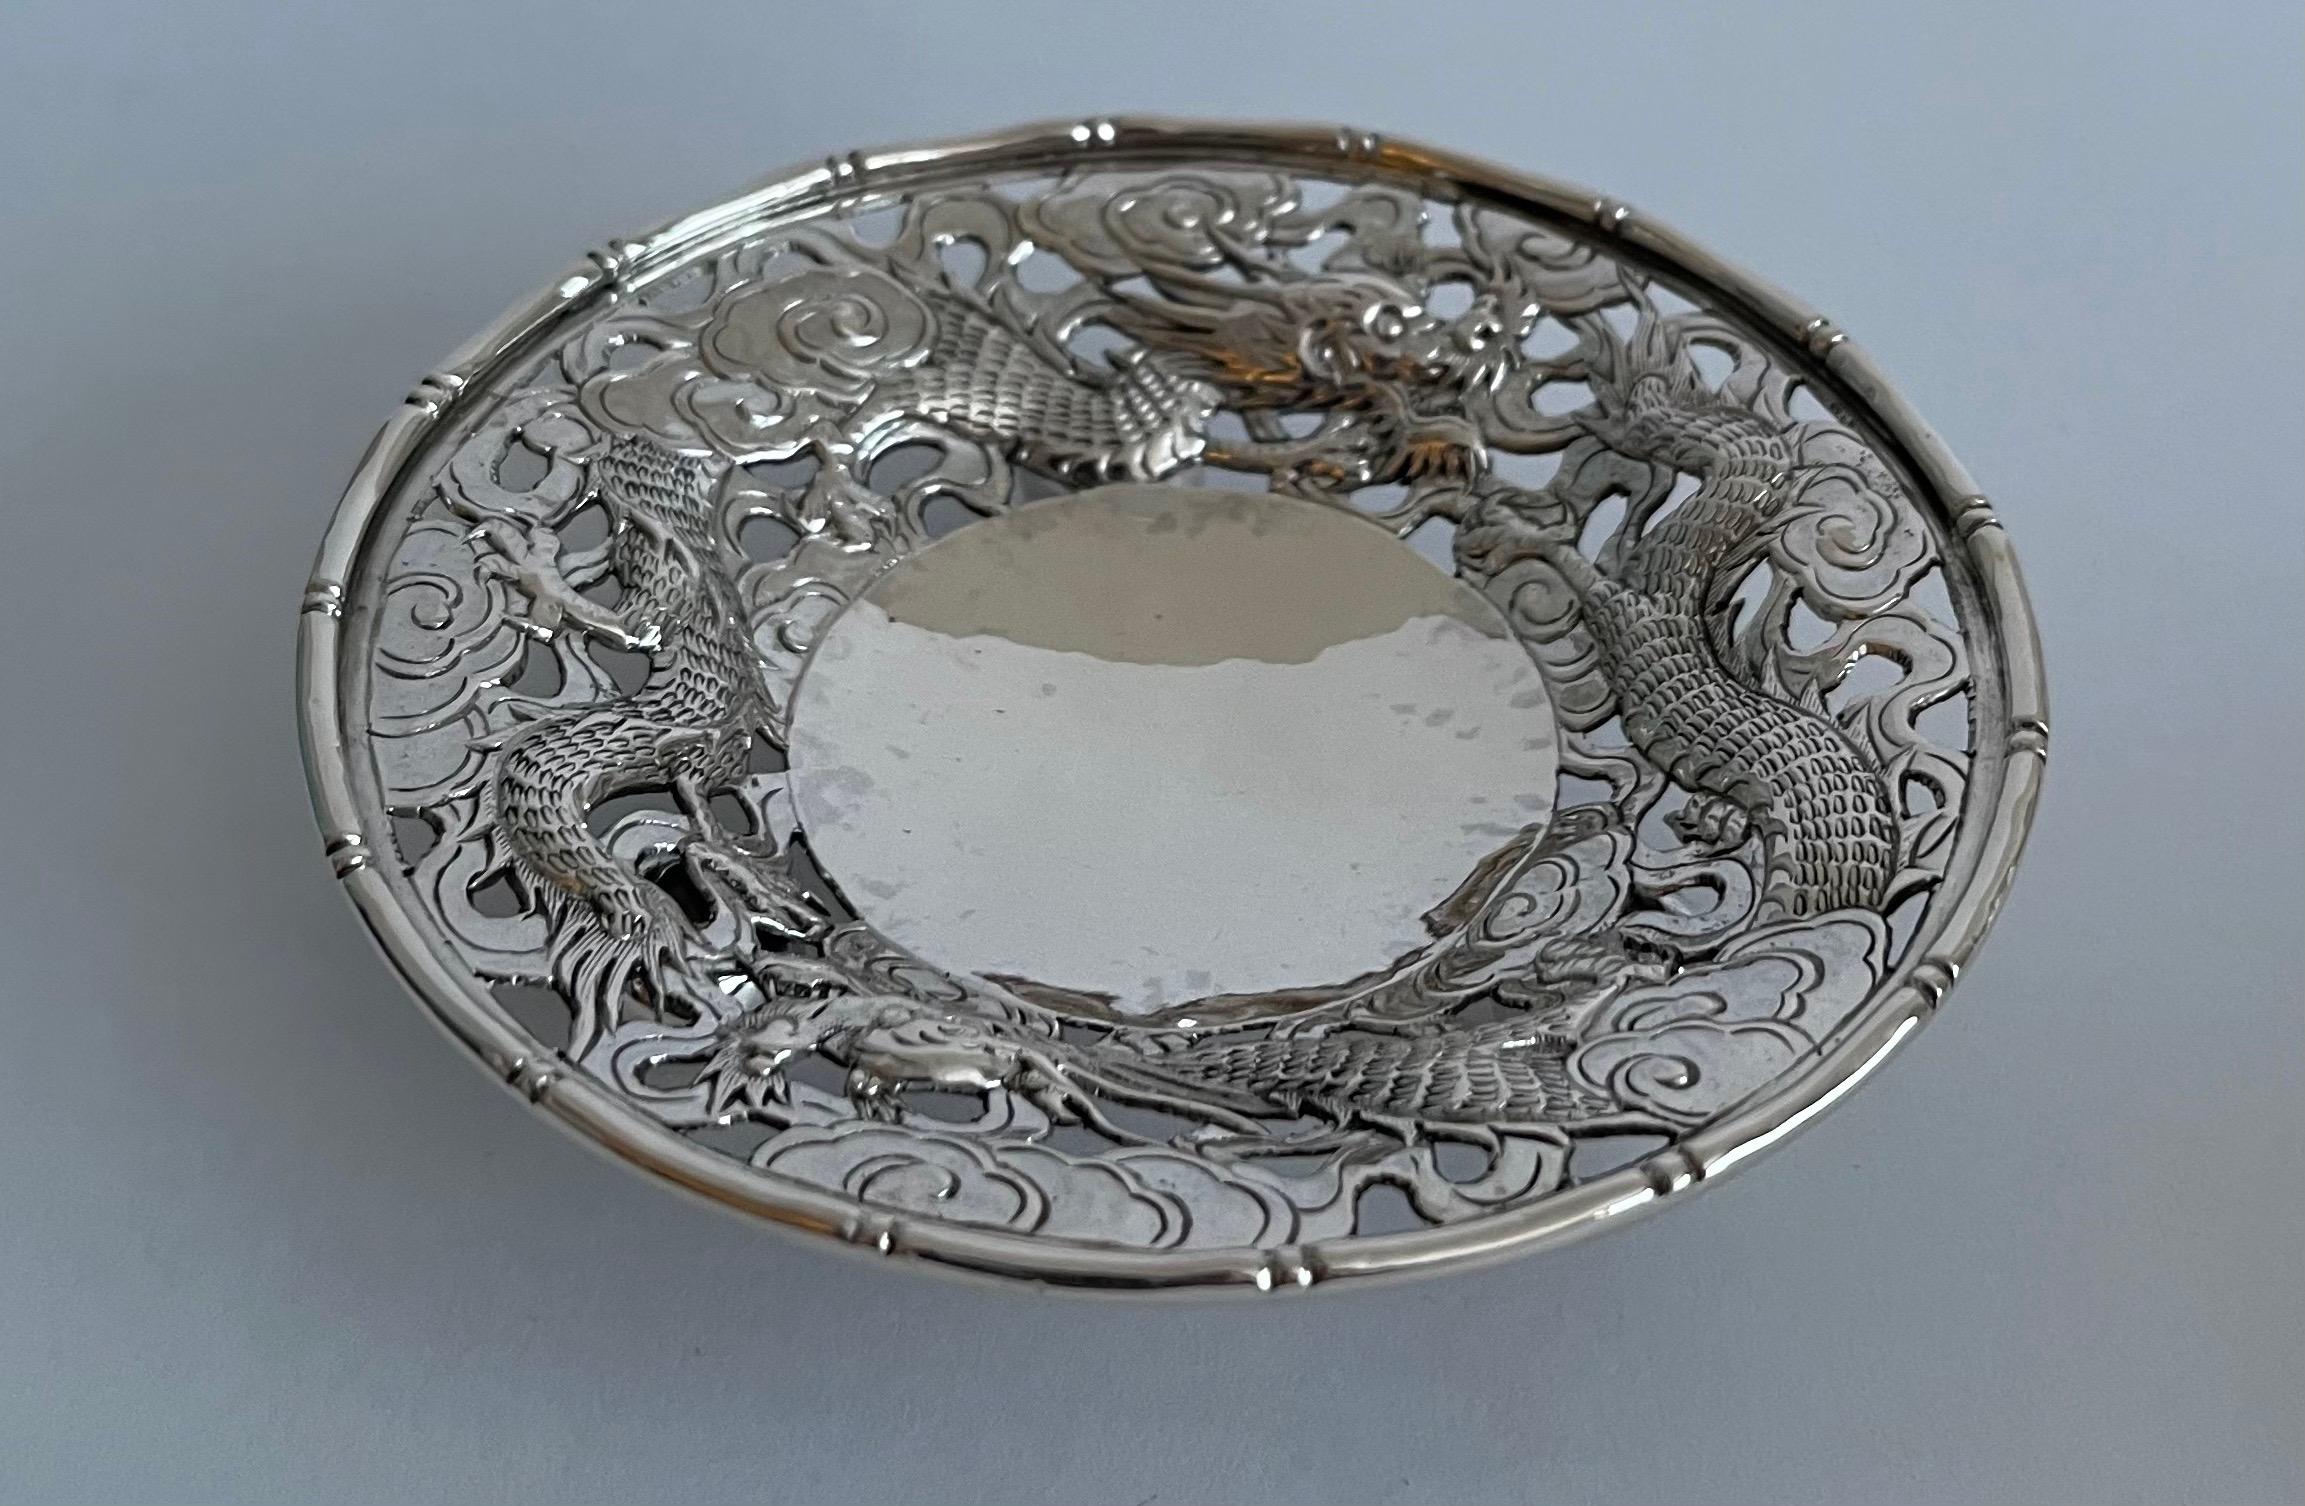 Repoussé Chinese Export Silver Dragon Bowls, Set of 3 For Sale